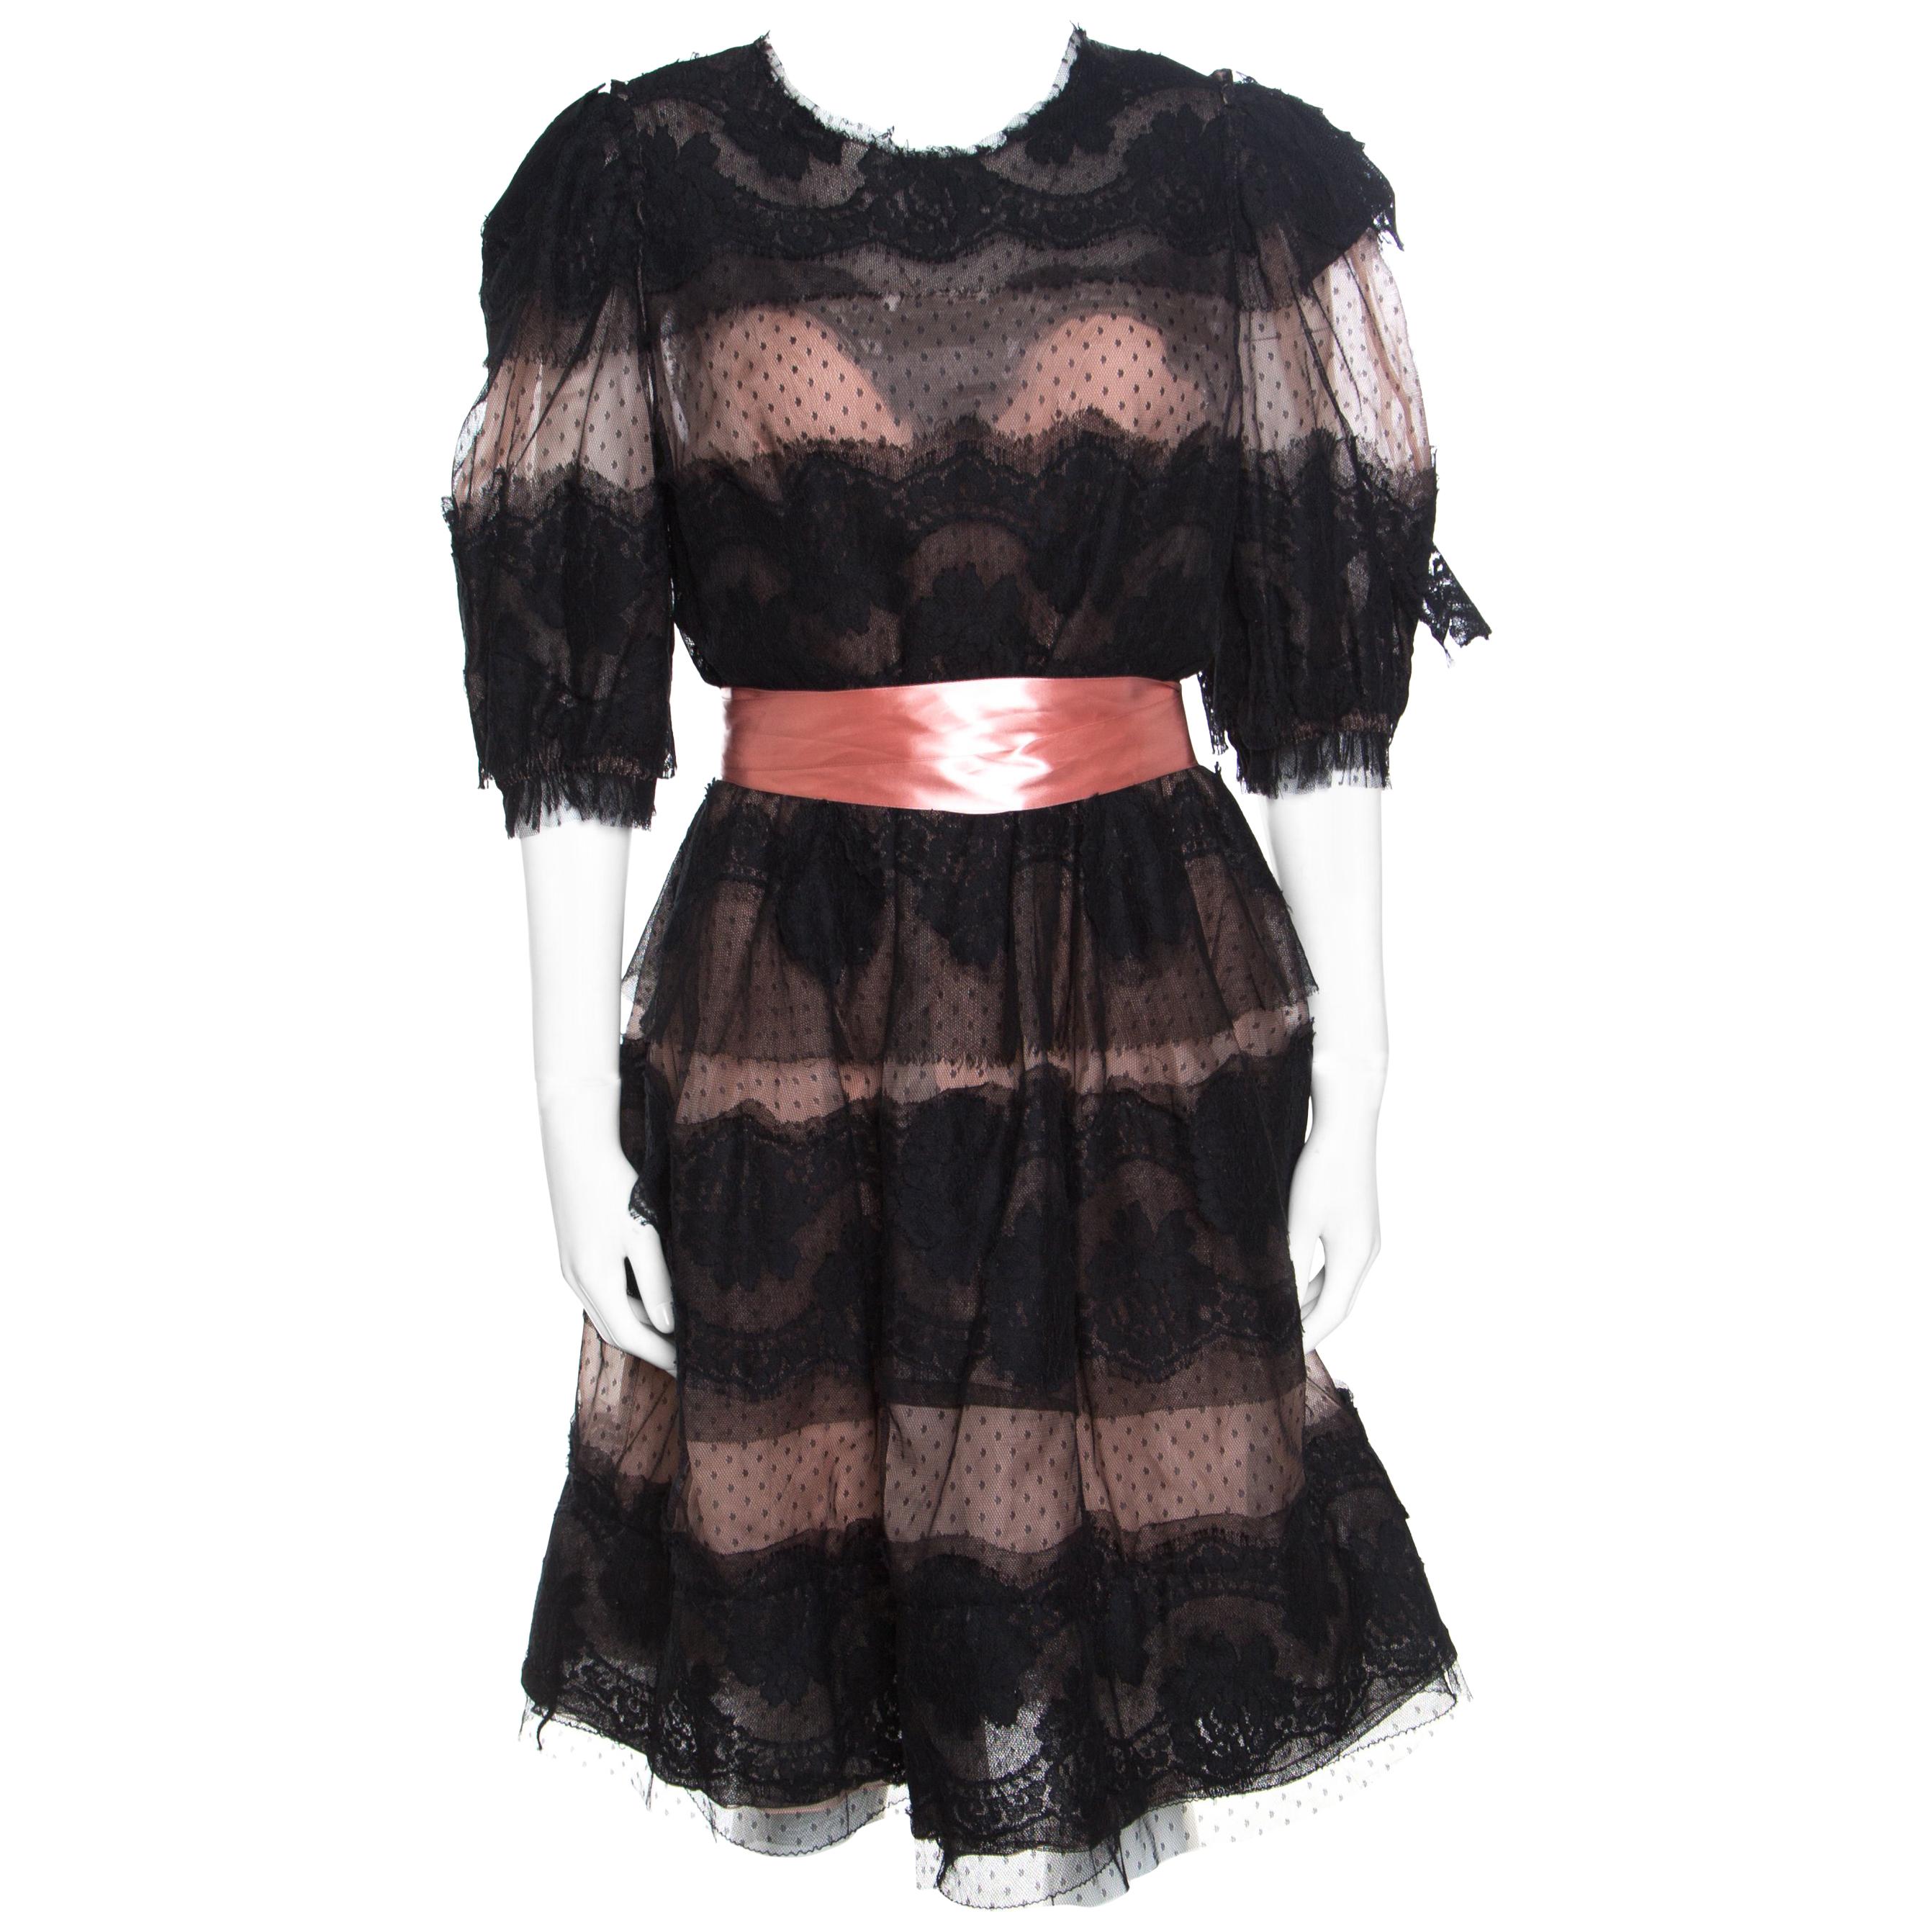 Dolce and Gabbana Black and Blush Pink Floral Scalloped Lace Belted Dress L